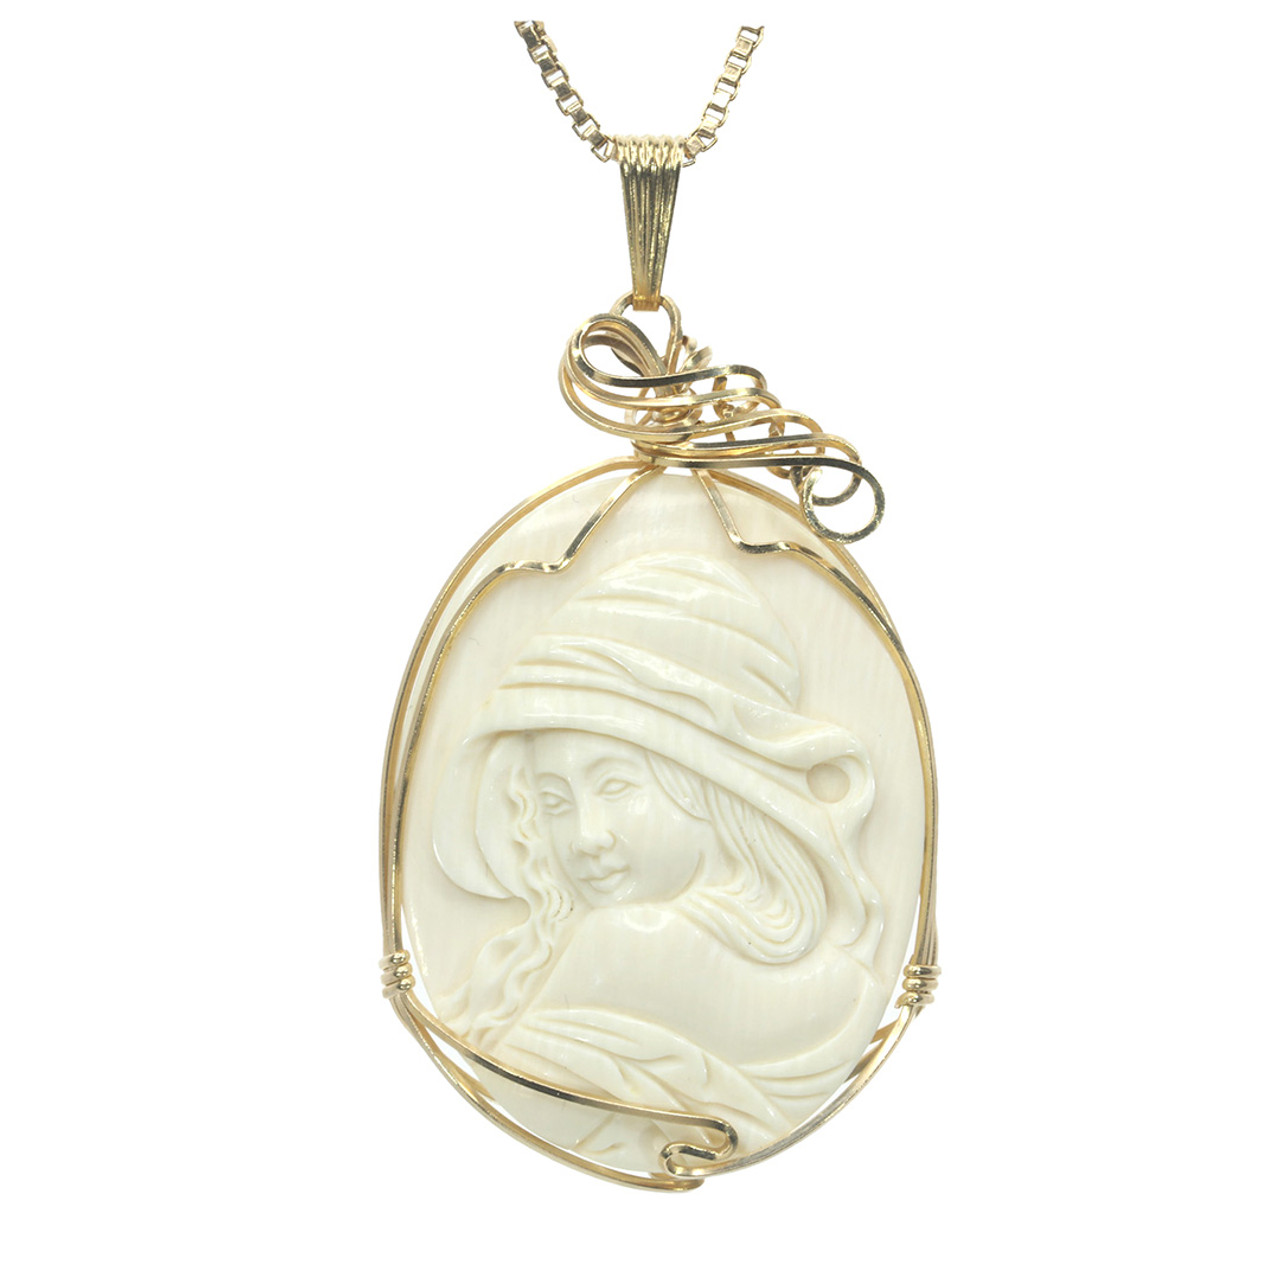 Mammoth Ivory Hooded Woman Cameo Jewelry [67911] Large